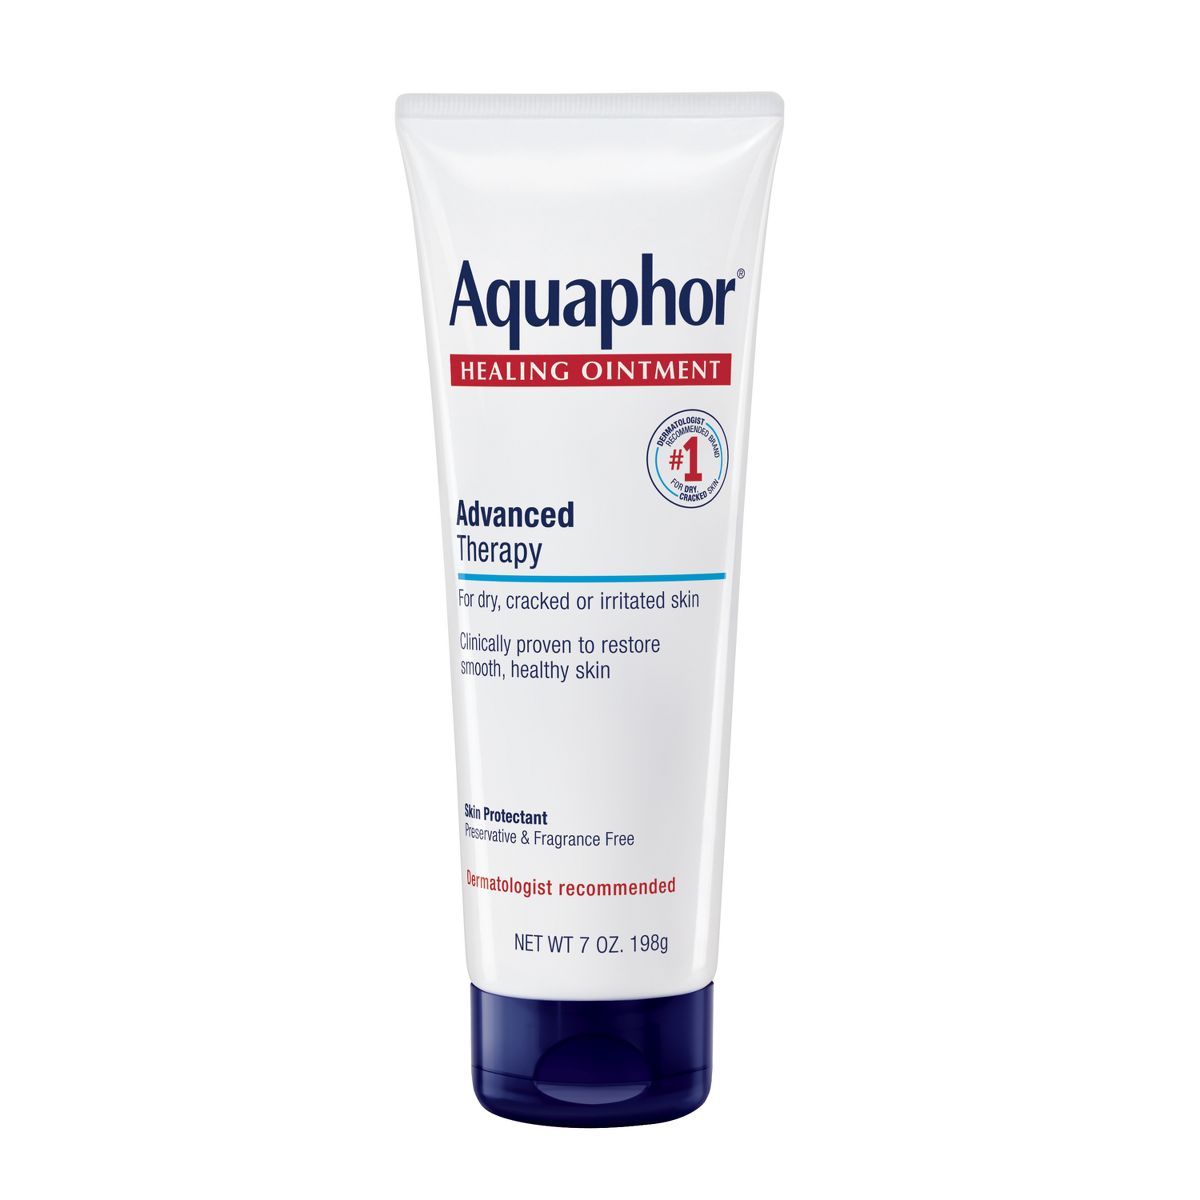 Aquaphor Healing Ointment Skin Protectant and Moisturizer for Dry and Cracked Skin Unscented | Target